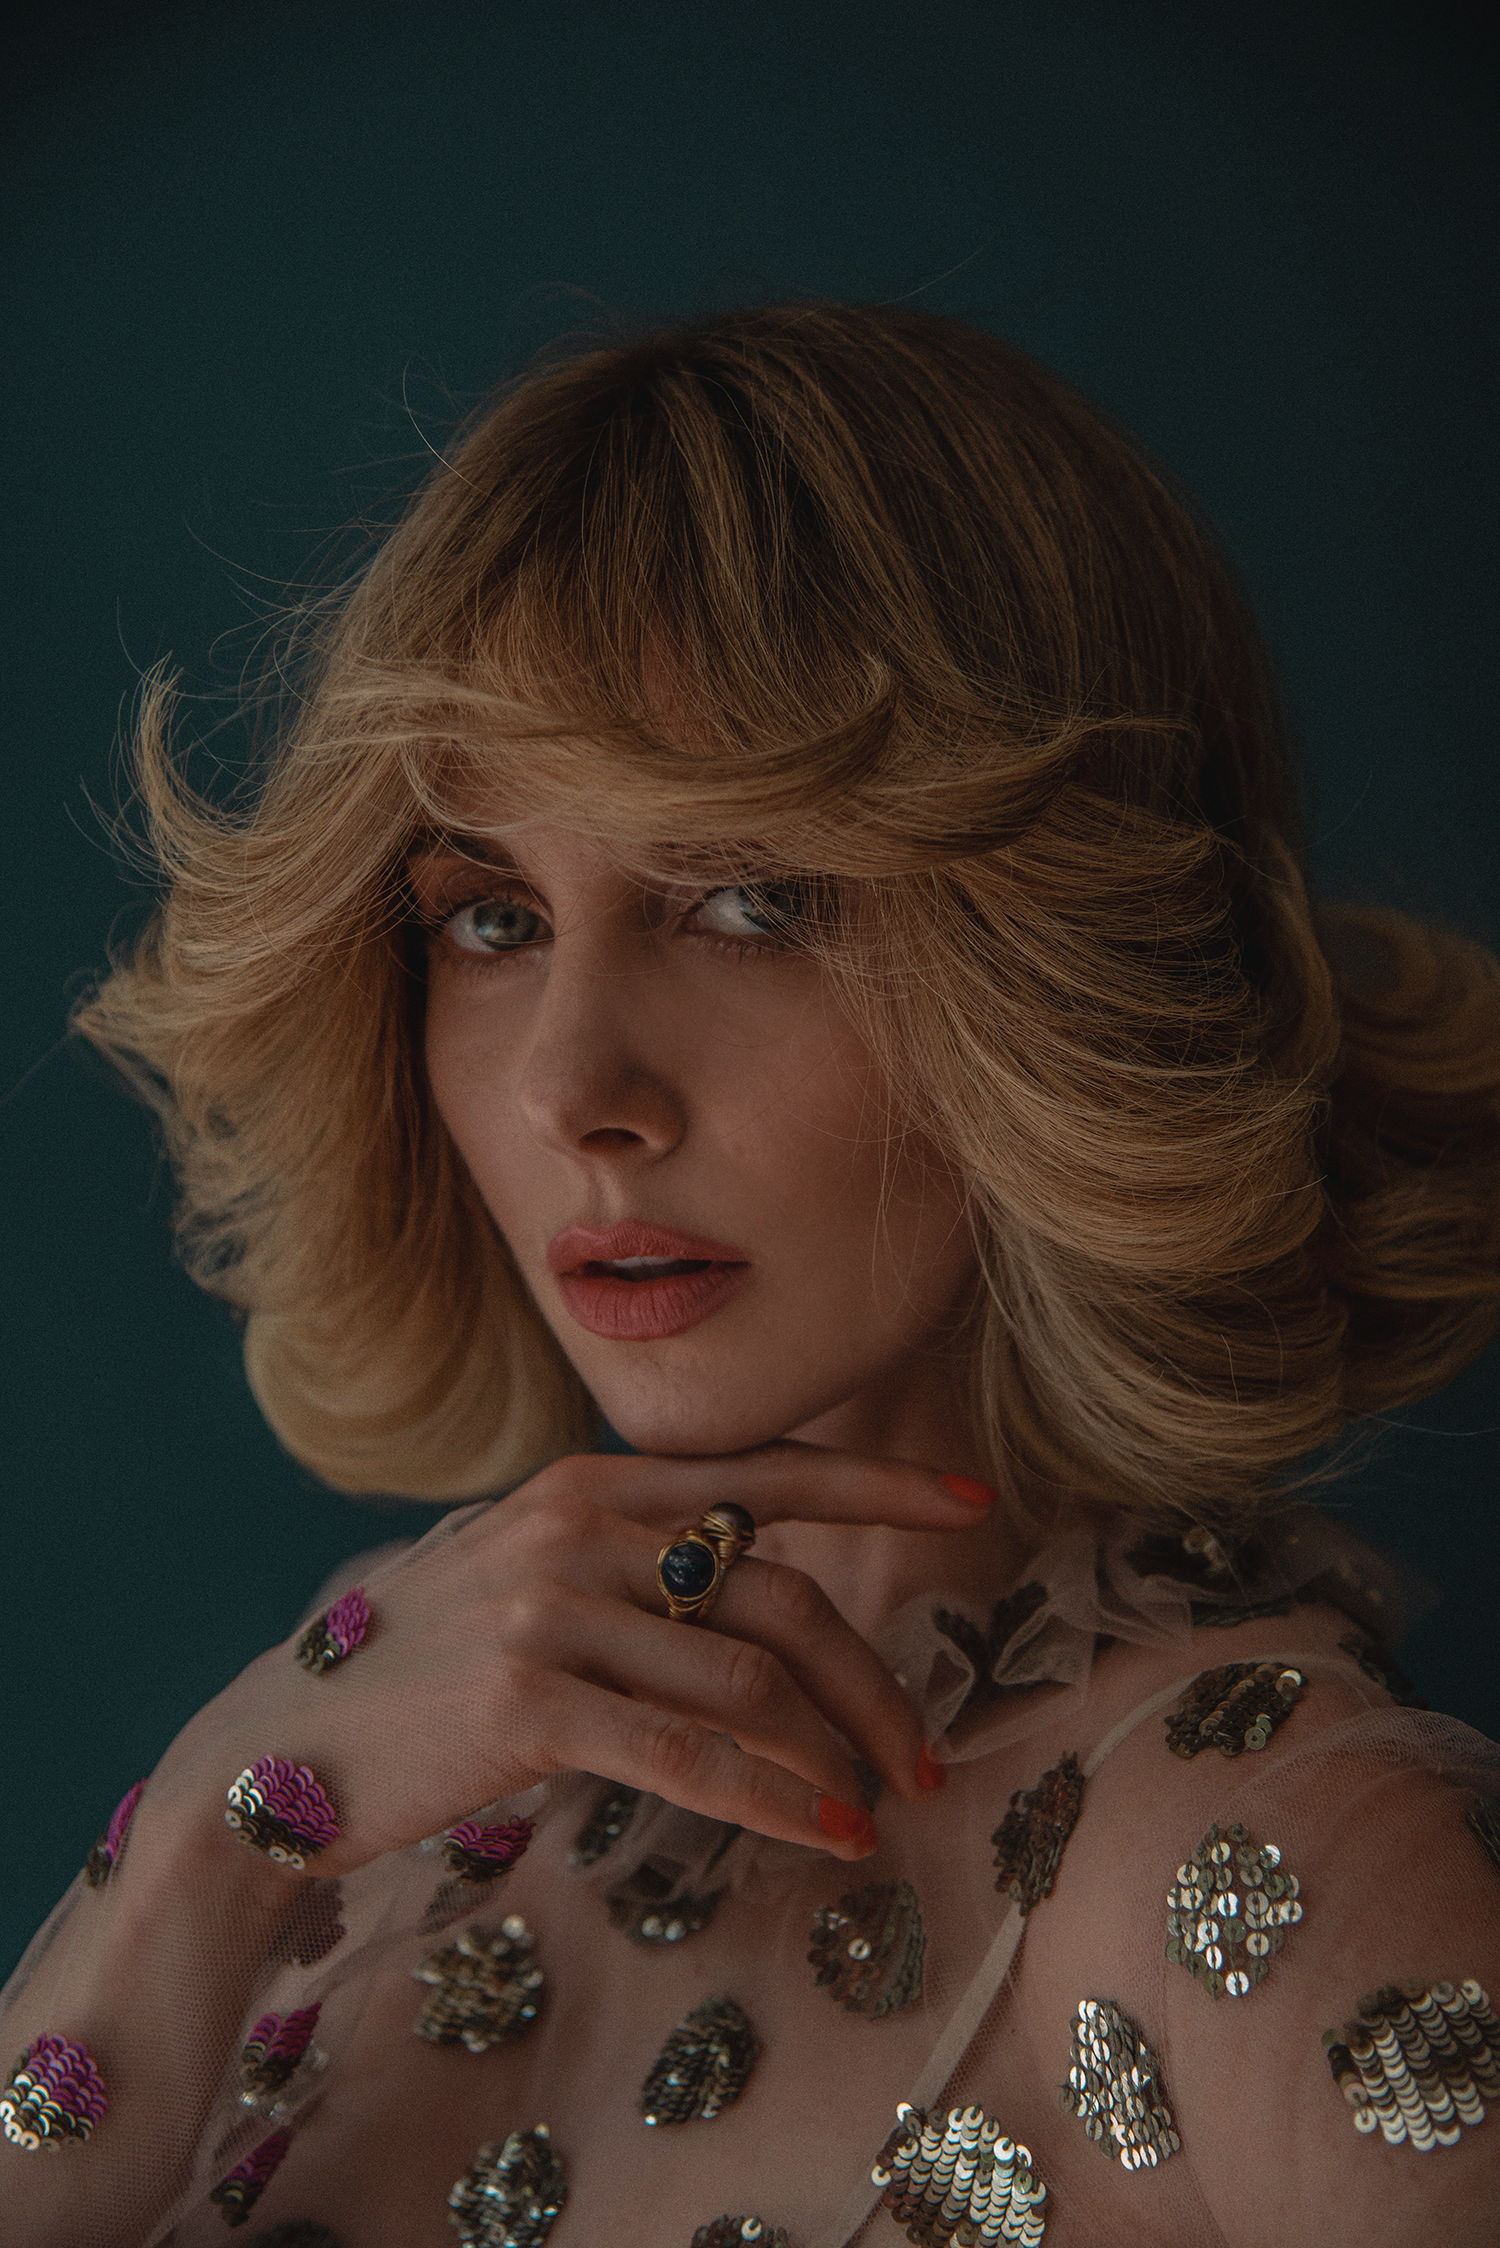 LADYGUNN NO. 18 COVER STORY: EXPANDING AND EXPLORING THE MANY FACETS OF ALISON BRIE